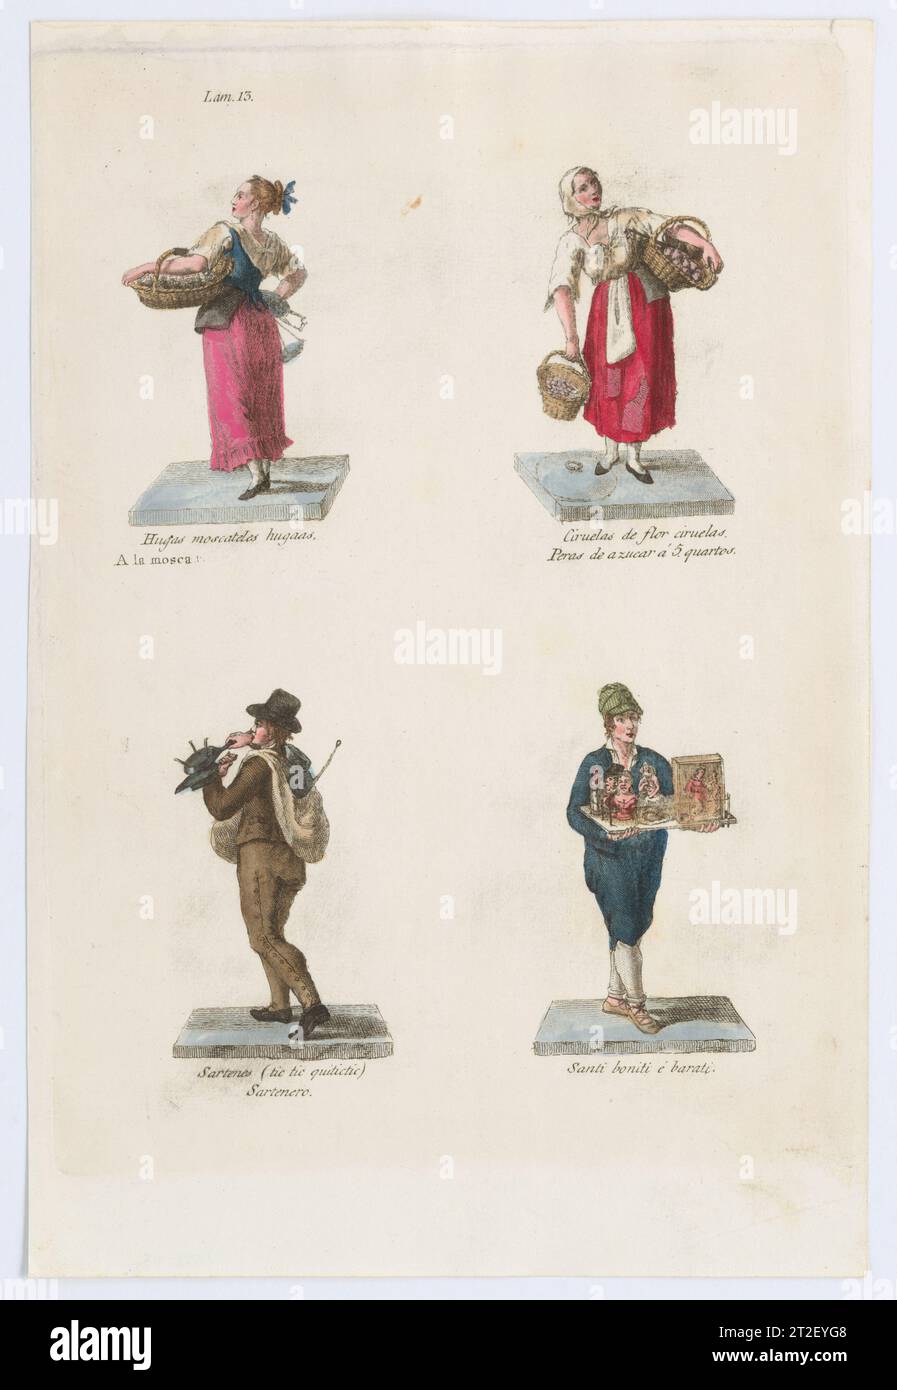 Plate 13: four street vendors from Madrid selling muscat grapes, plums, pans and pop-up saints, from 'Los Gritos de Madrid' (The Cries of Madrid) Miguel Gamborino Spanish Publisher Imprenta Real, Madrid Spanish 1809–17 See comment for 2022.53. View more. Plate 13: four street vendors from Madrid selling muscat grapes, plums, pans and pop-up saints, from 'Los Gritos de Madrid' (The Cries of Madrid). Miguel Gamborino (Spanish, Valencia 1760–1828 Madrid). 1809–17. Engraving with hand coloring. Imprenta Real, Madrid. Prints Stock Photo